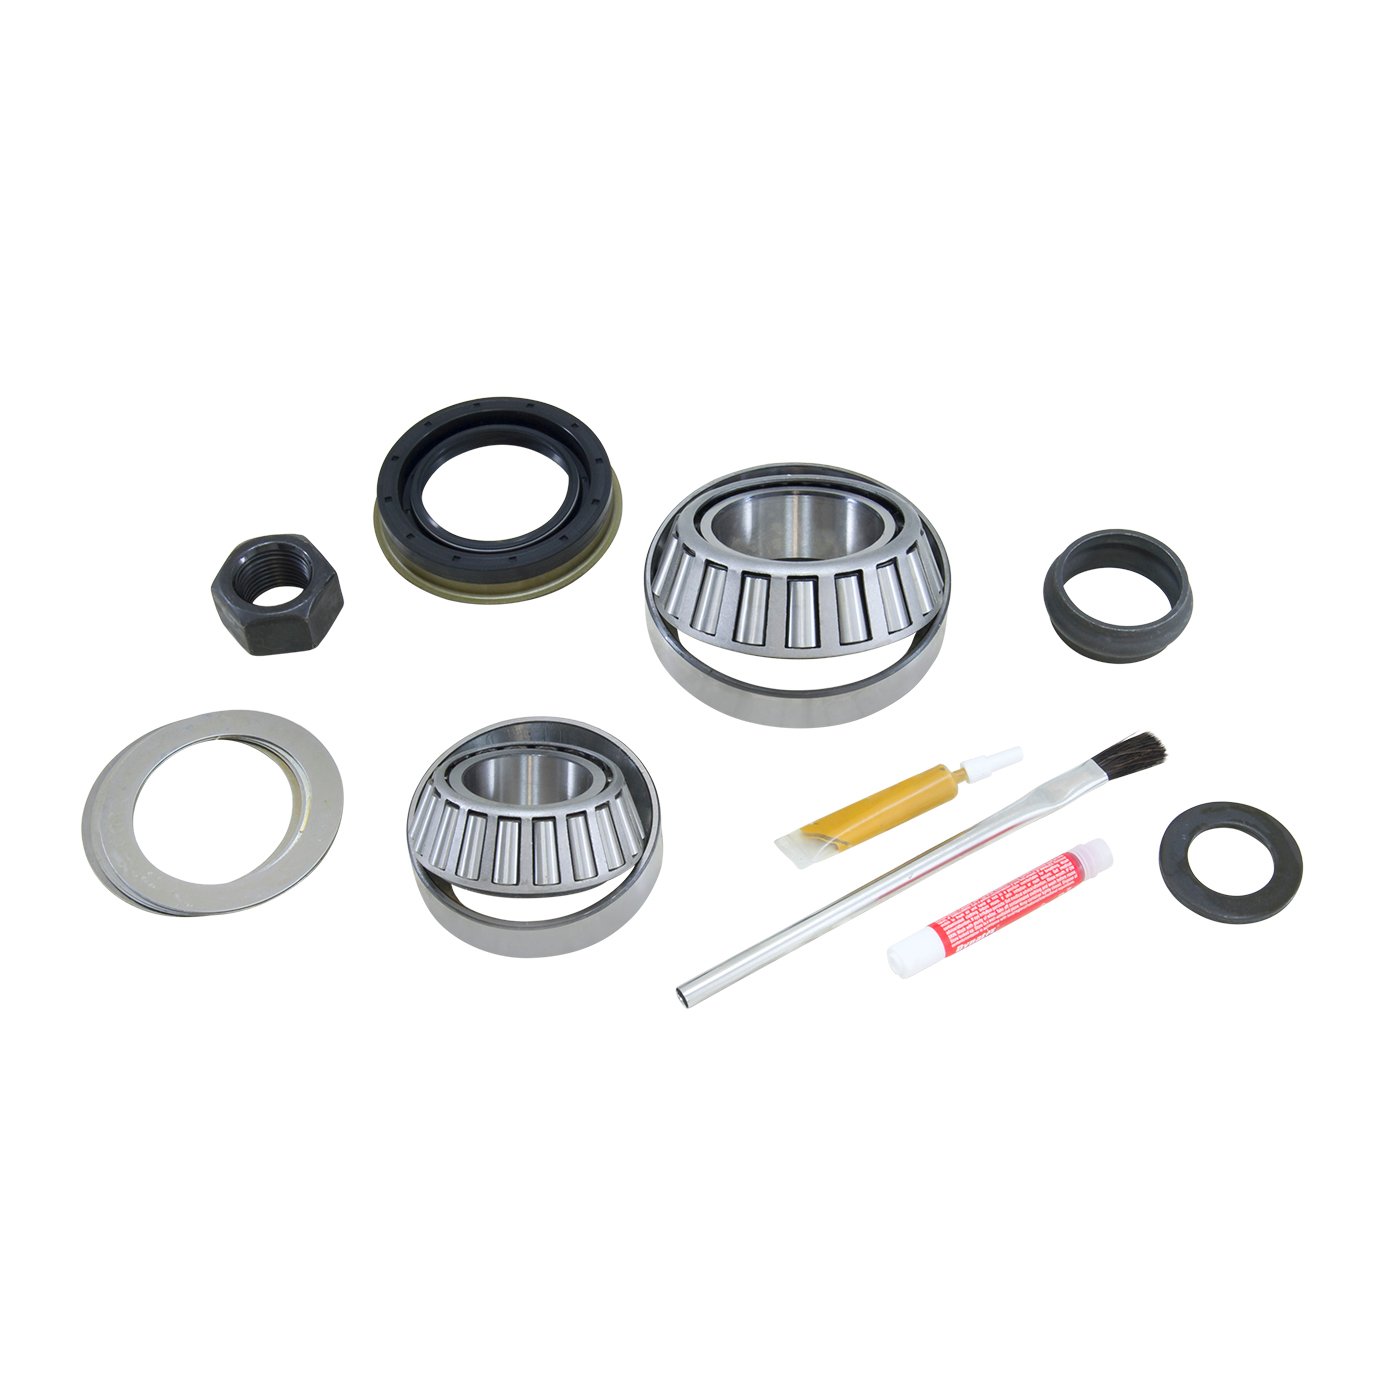 Pinion Install Kit For Chrysler 8.75 in. (#42) Differential.